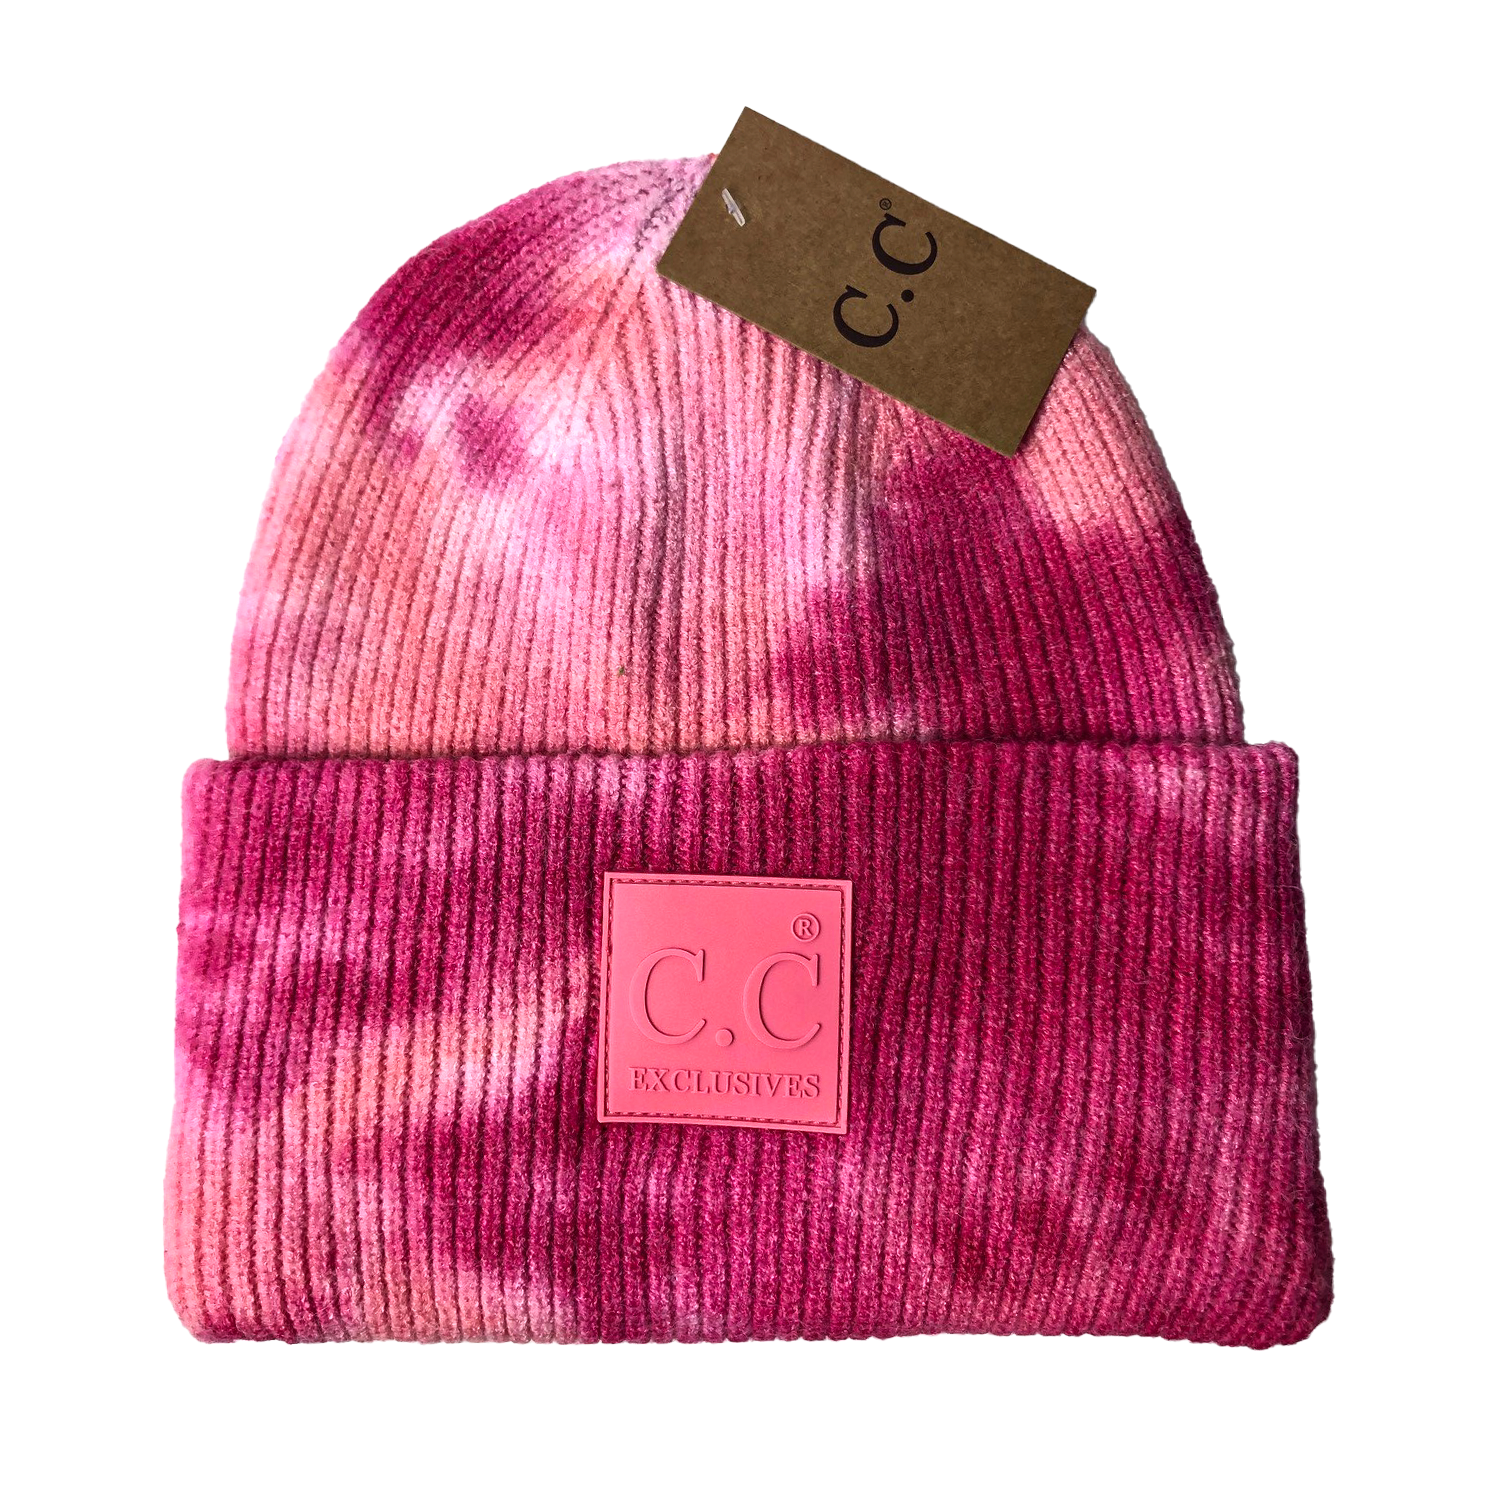 HAT-7380 Tie Dye Beanie with C.C Rubber Patch - Fuschia/Pink